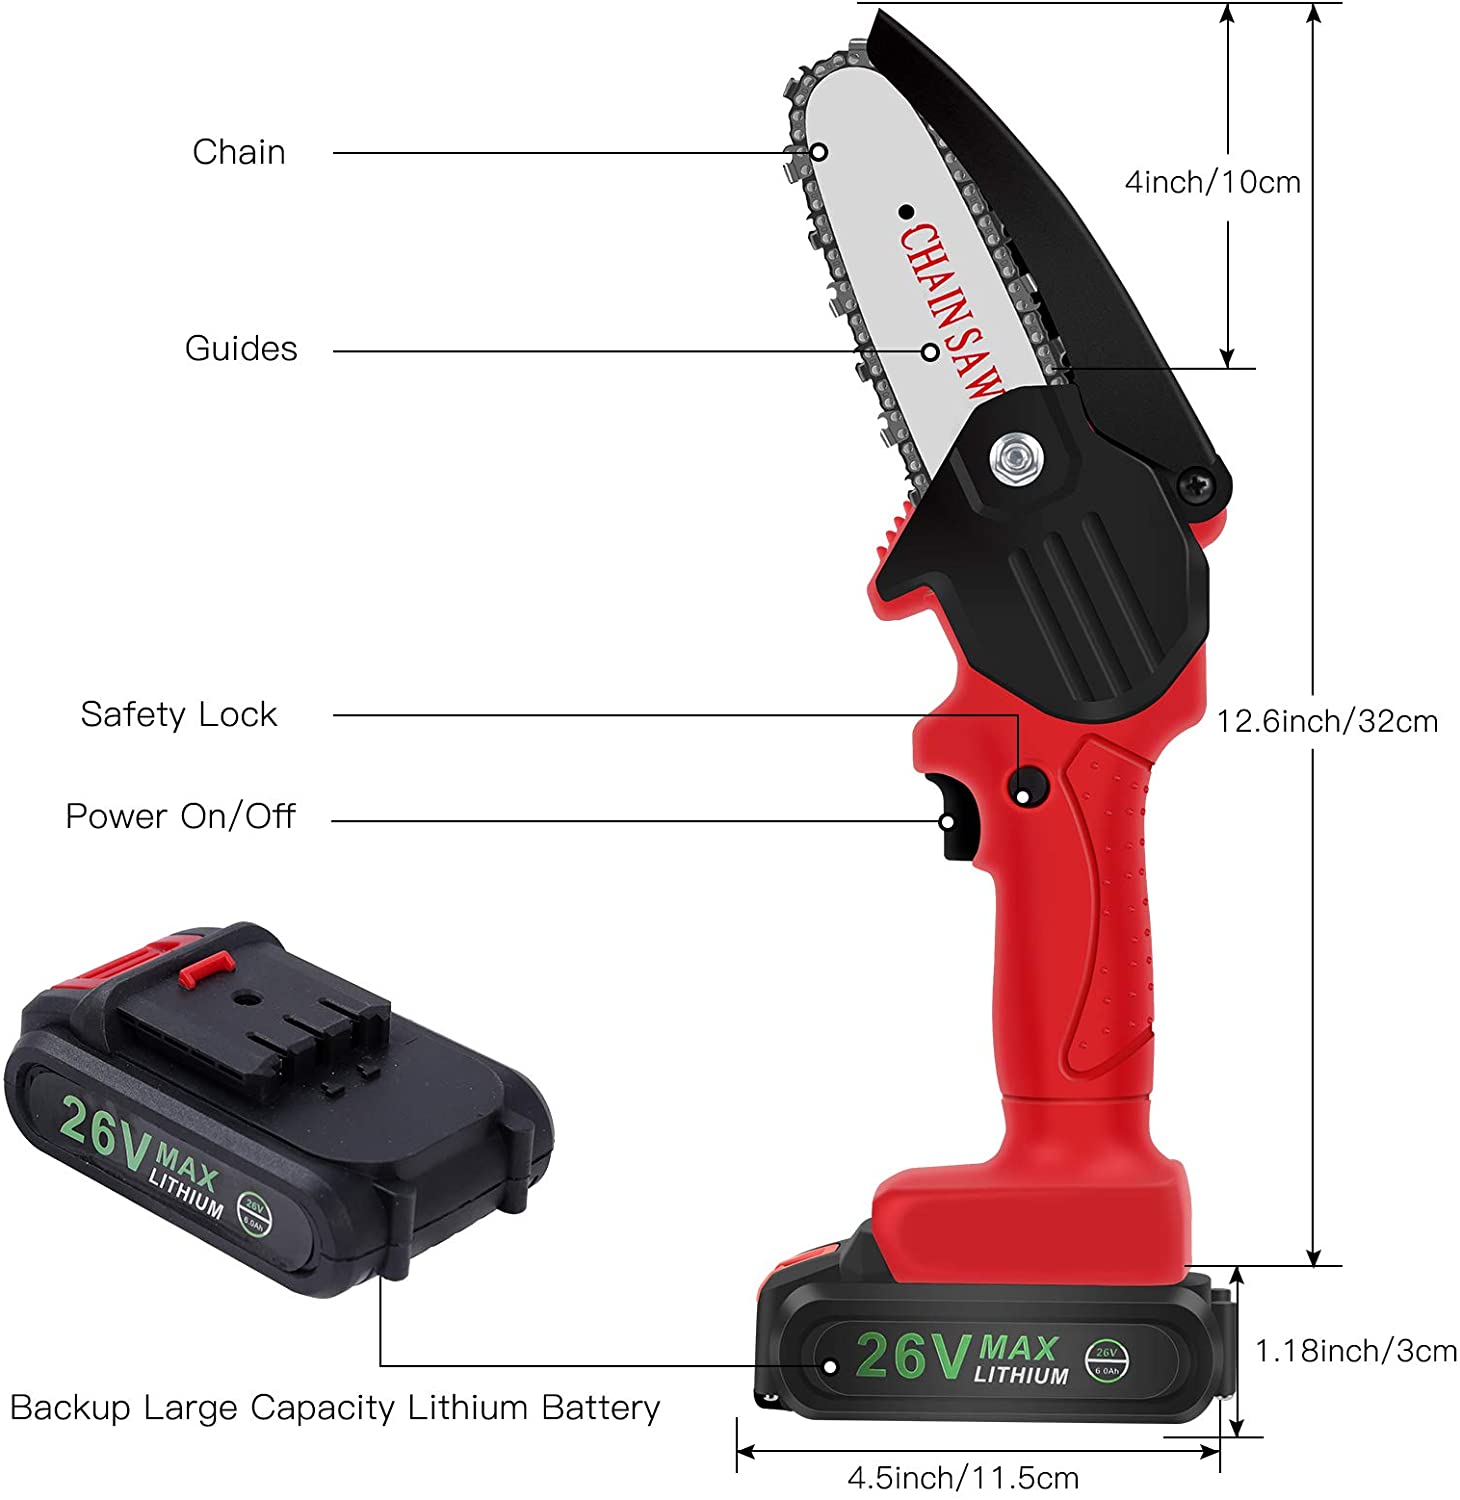 INLOVEARTS 4in Portable Electric Pruning Saw Professional Cordless Electric Pruning Shears Rechargeable 21V Lithium Battery Powered Tree Branch Pruner Garden Tool Mini Electric Chain Saw Black 